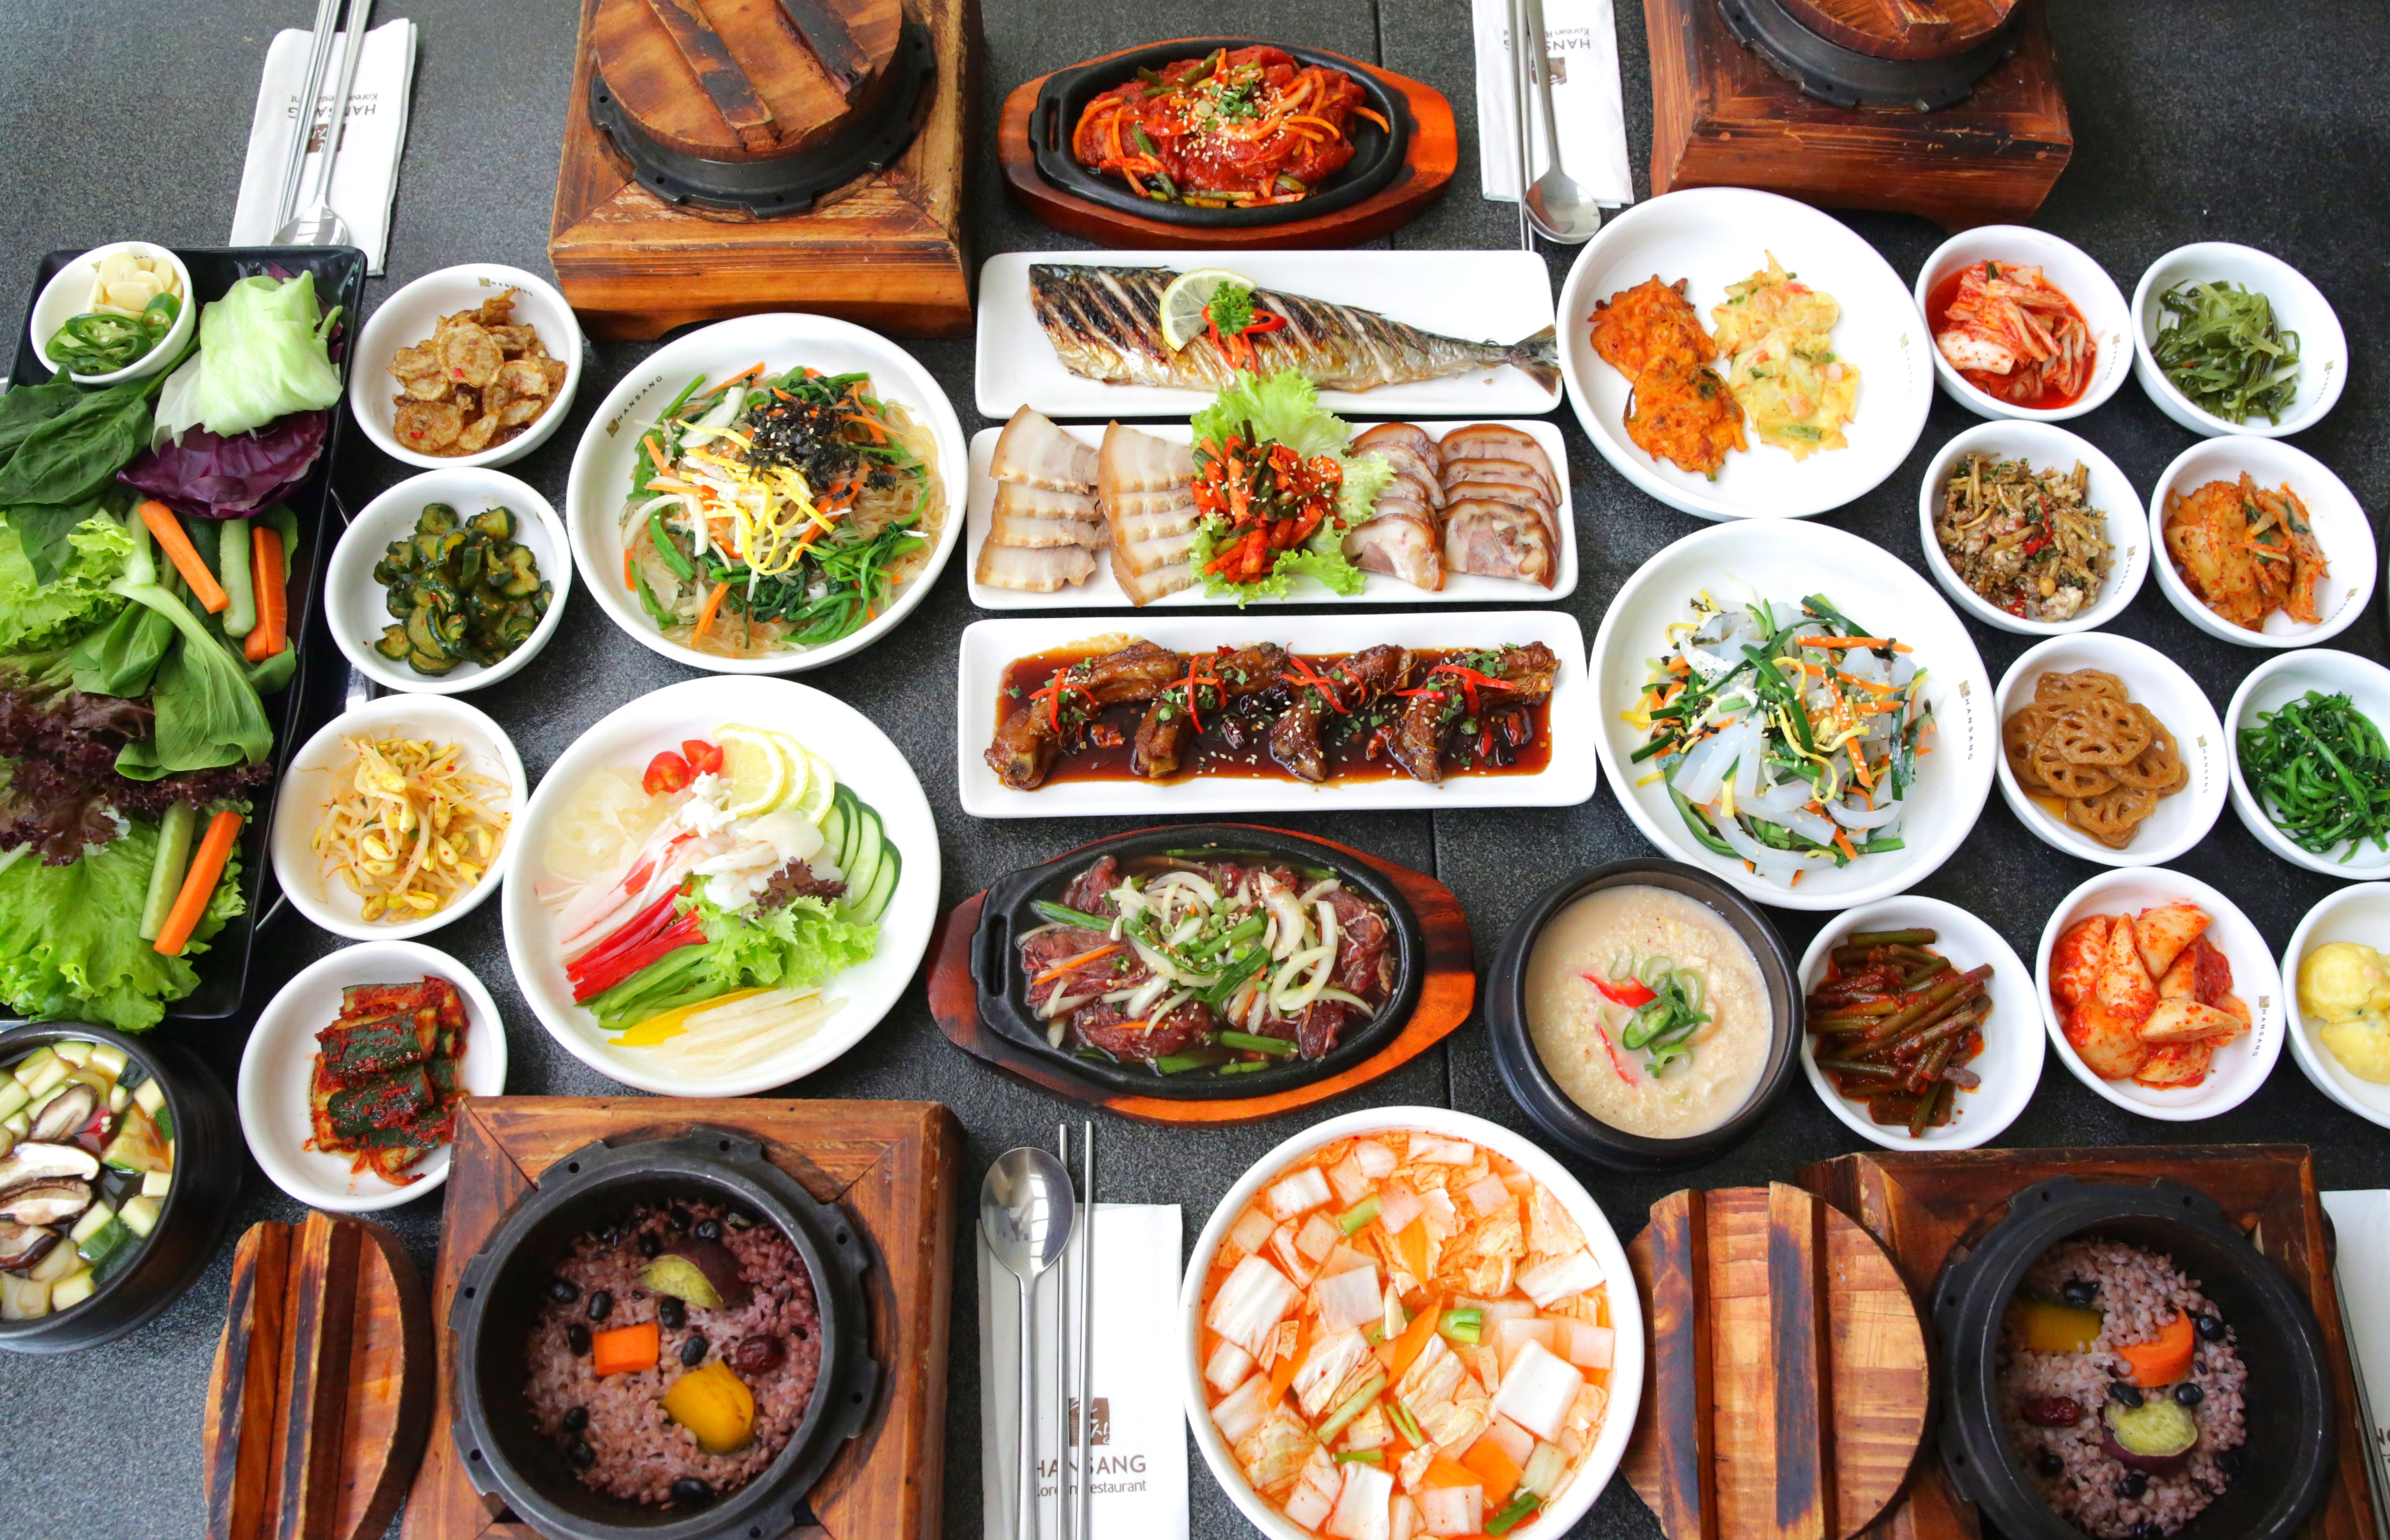 hanjeongsik course meal is a traditional korean course meal made for 